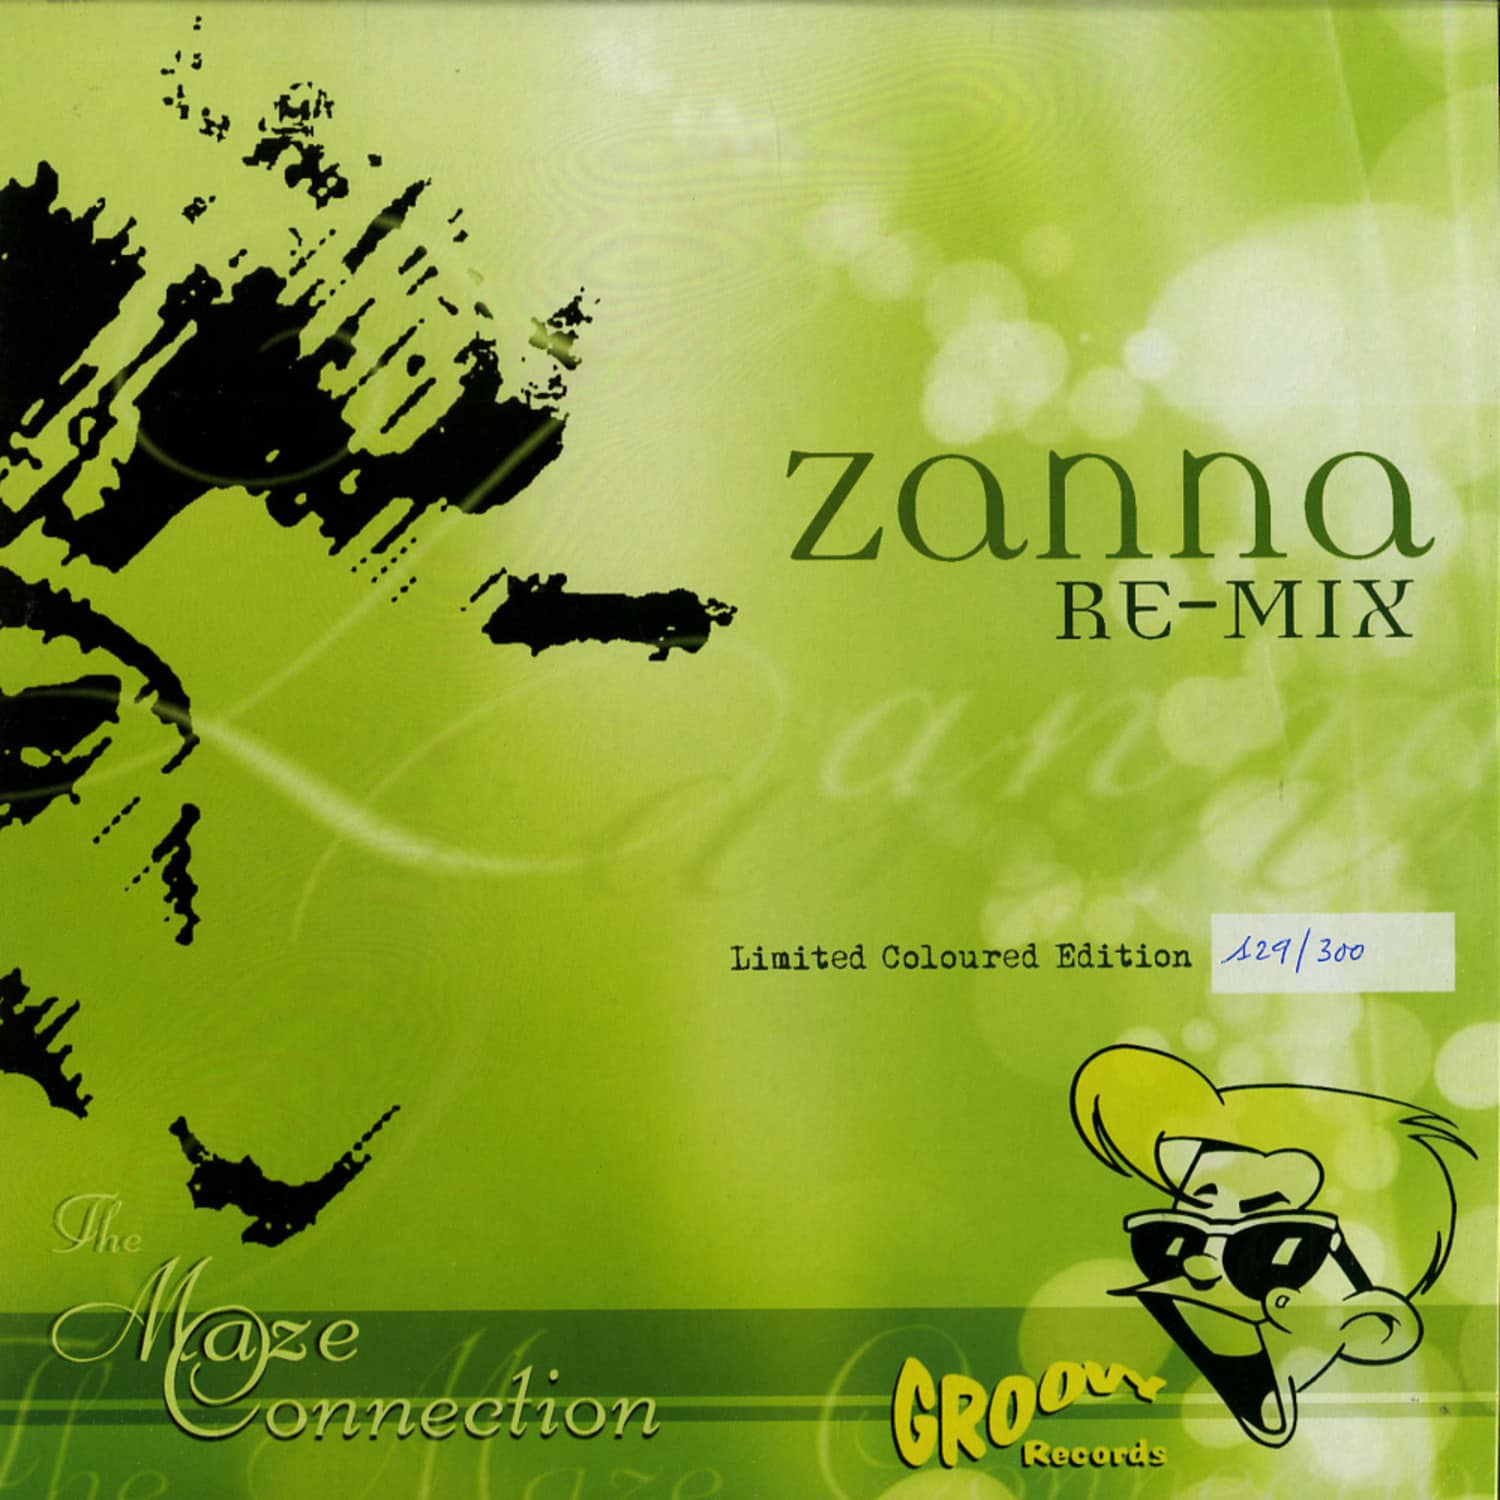 The Maze Connection - ZANNA RE-MIX 